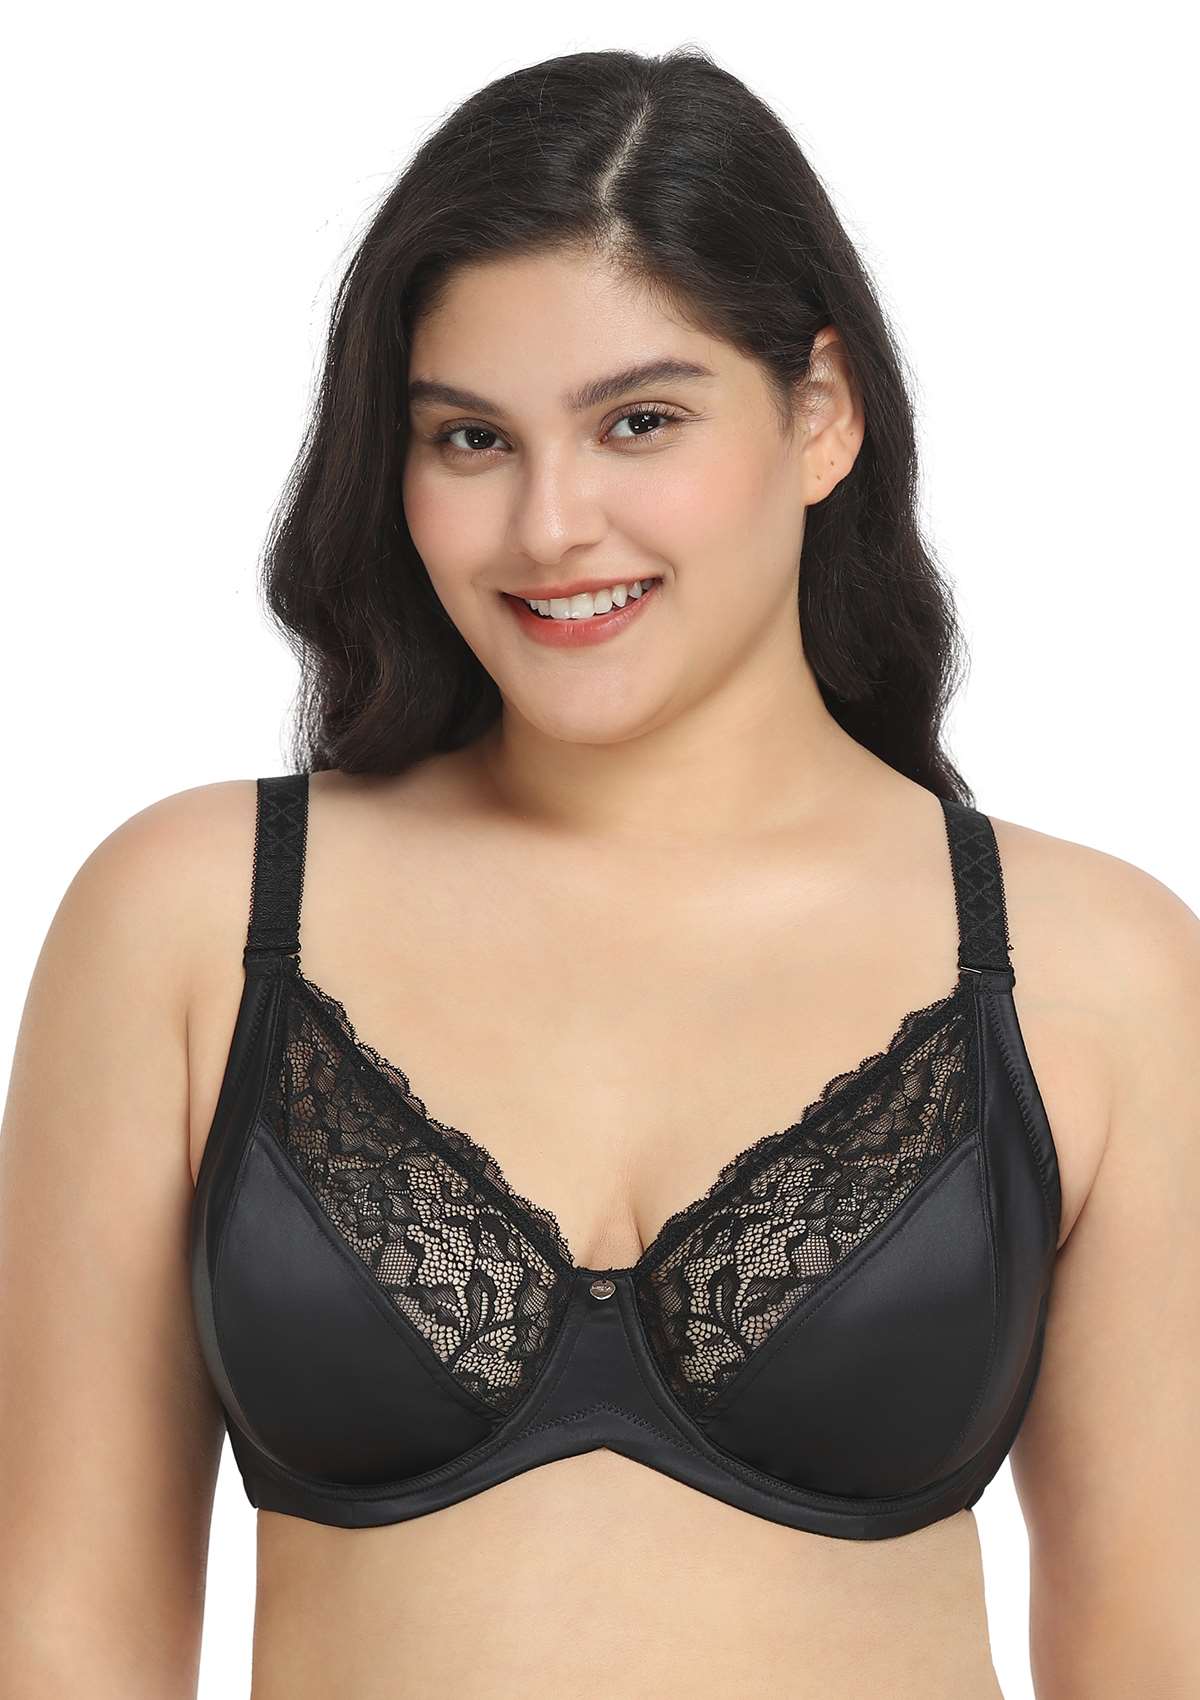 HSIA Foxy Satin Silky Full Coverage Underwire Bra With Floral Lace Trim - Black / 38 / H